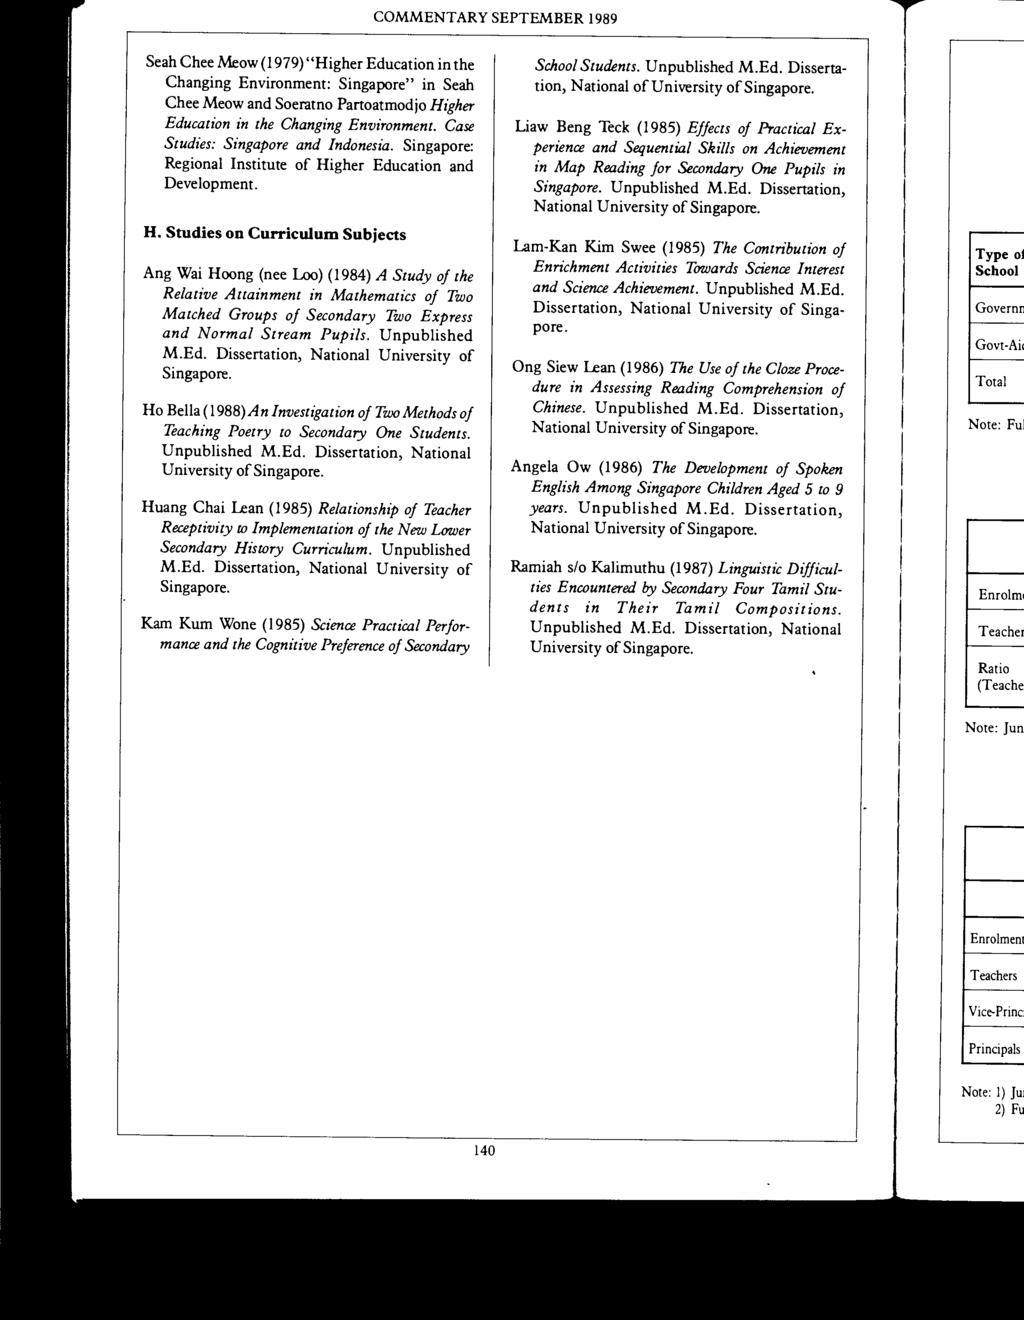 COMMENTARY SEPTEMBER 1989 Seah Chee Meow ( 1979) "Higher Education in the Changing Environment: Singapore" in Seah Chee Meow and Soeratno Partoatmodjo Higher Education in the Changing Environment.